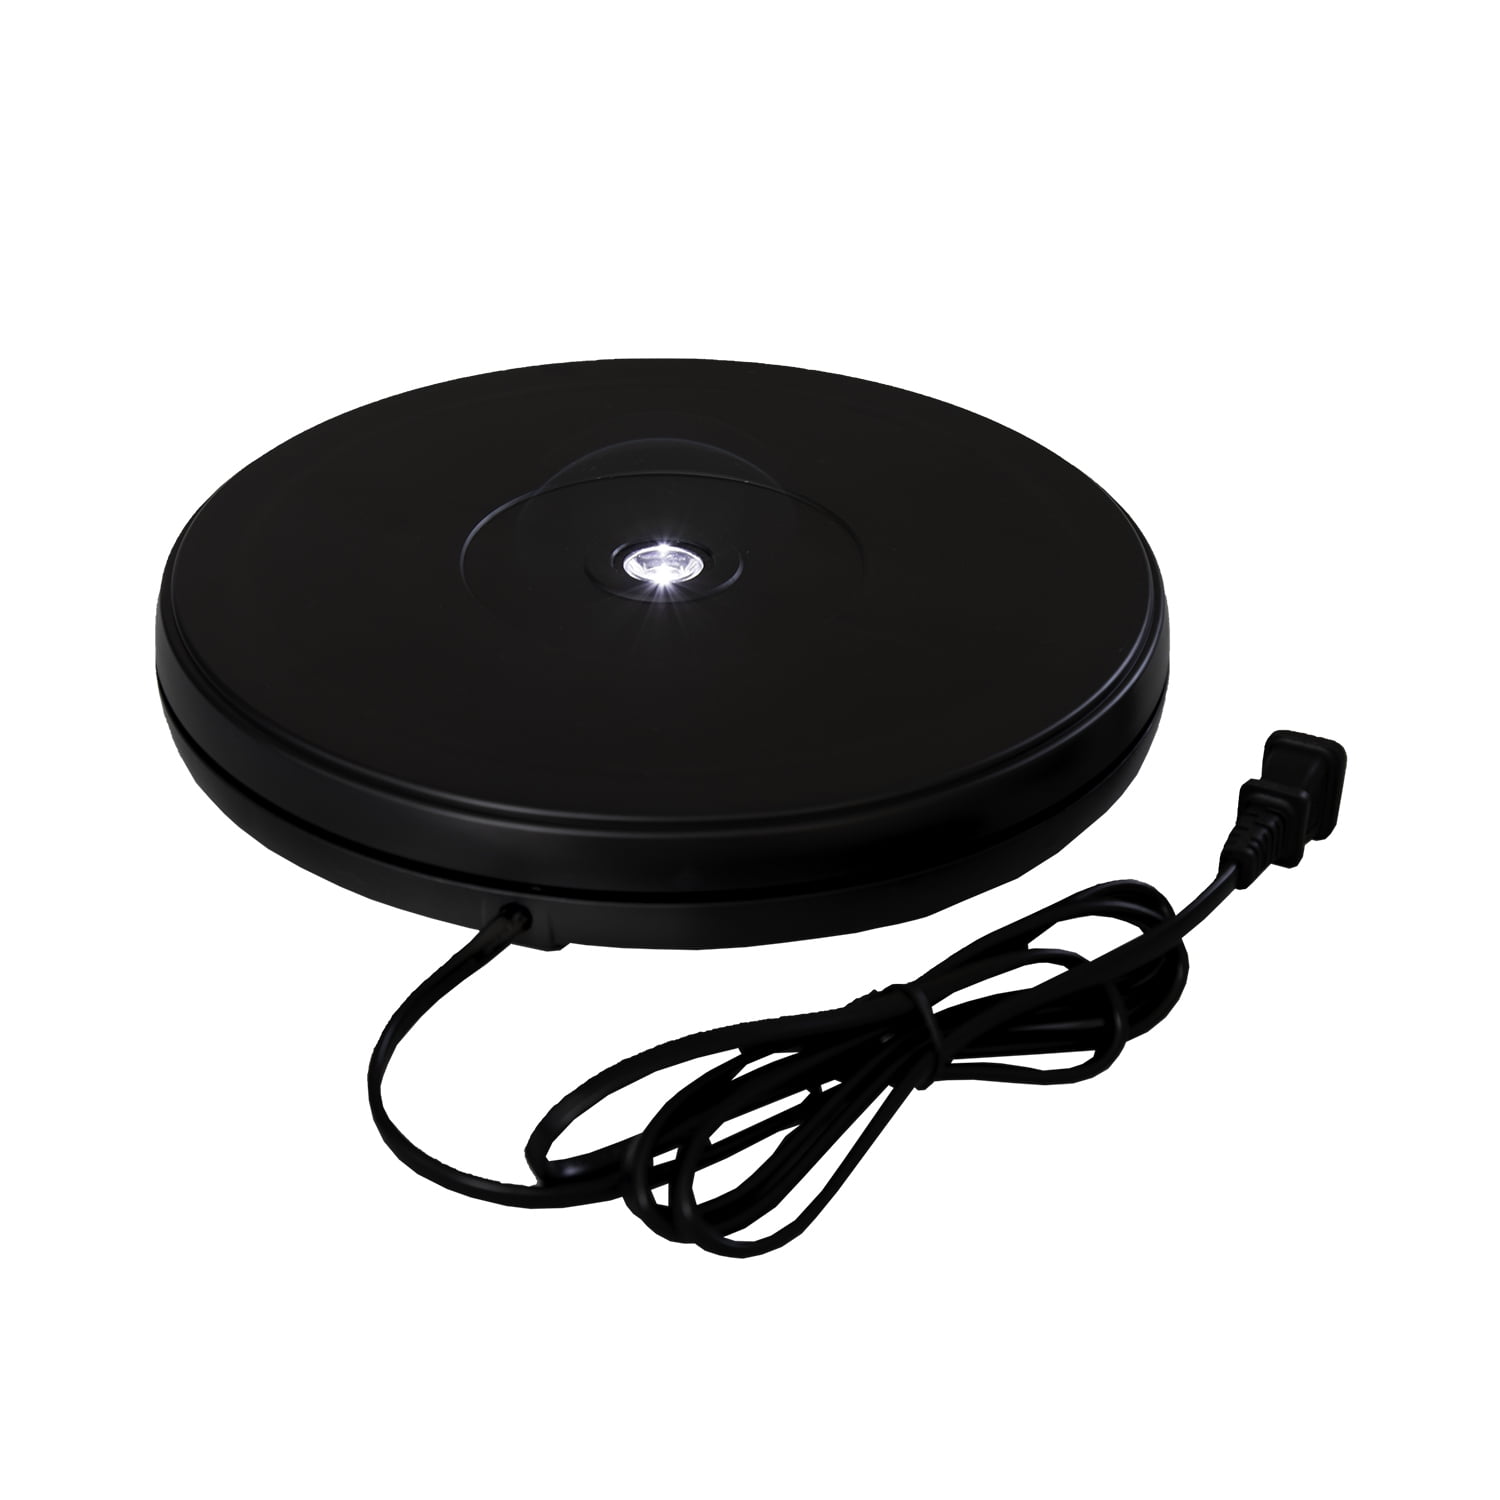 Trifecta Electric Motorized 360 Degree Electric Rotating Turntable